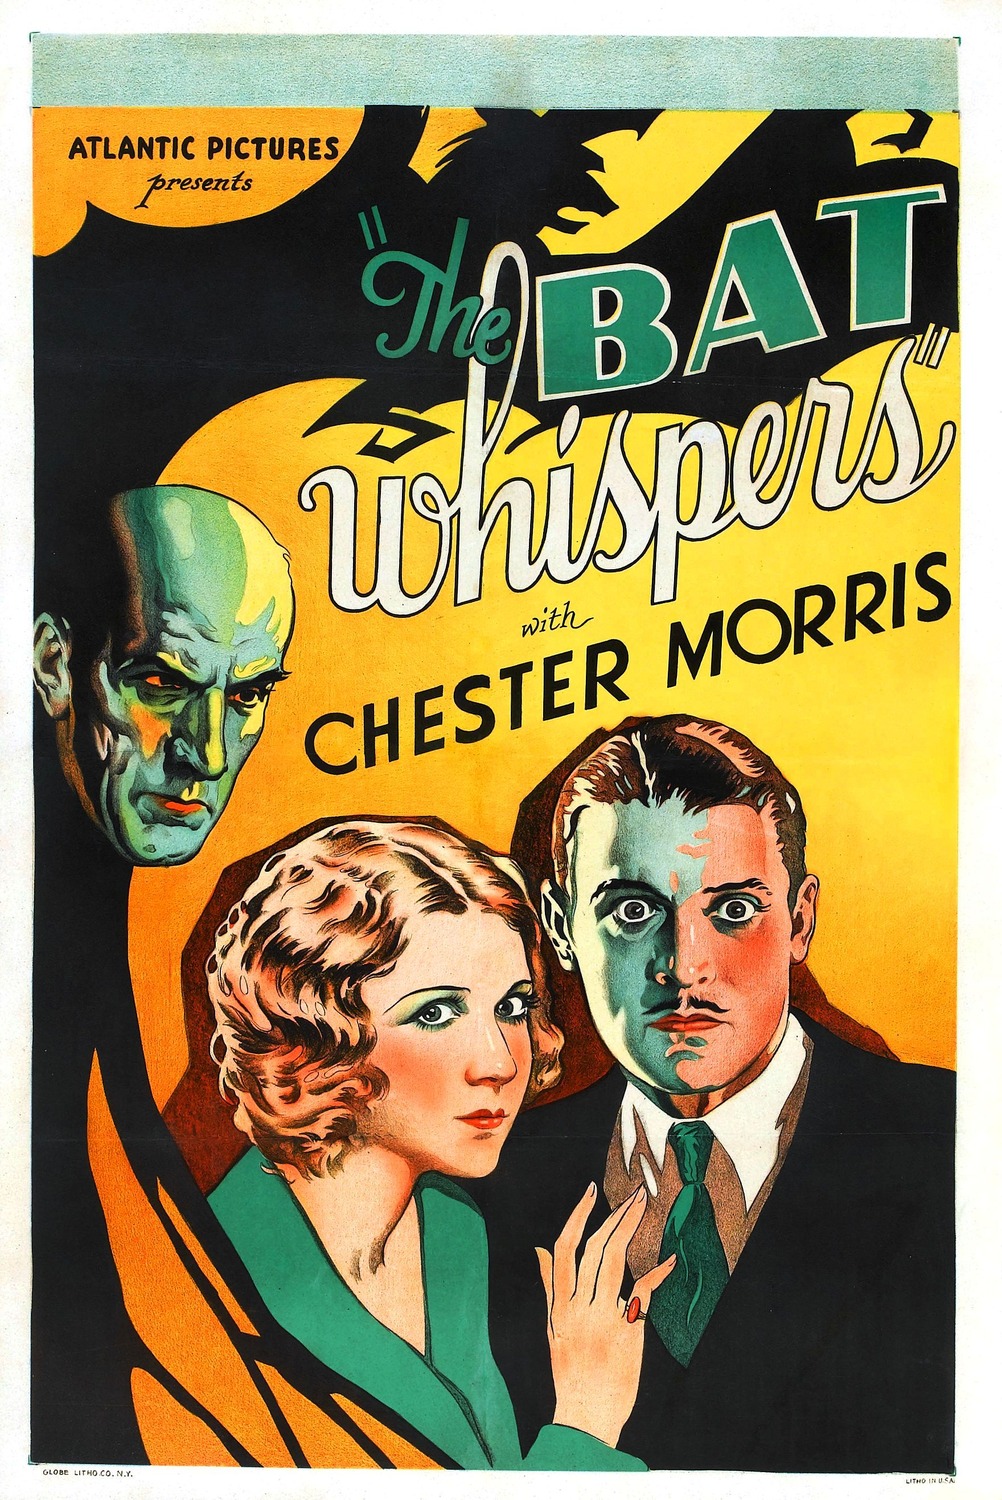 Extra Large Movie Poster Image for The Bat Whispers 